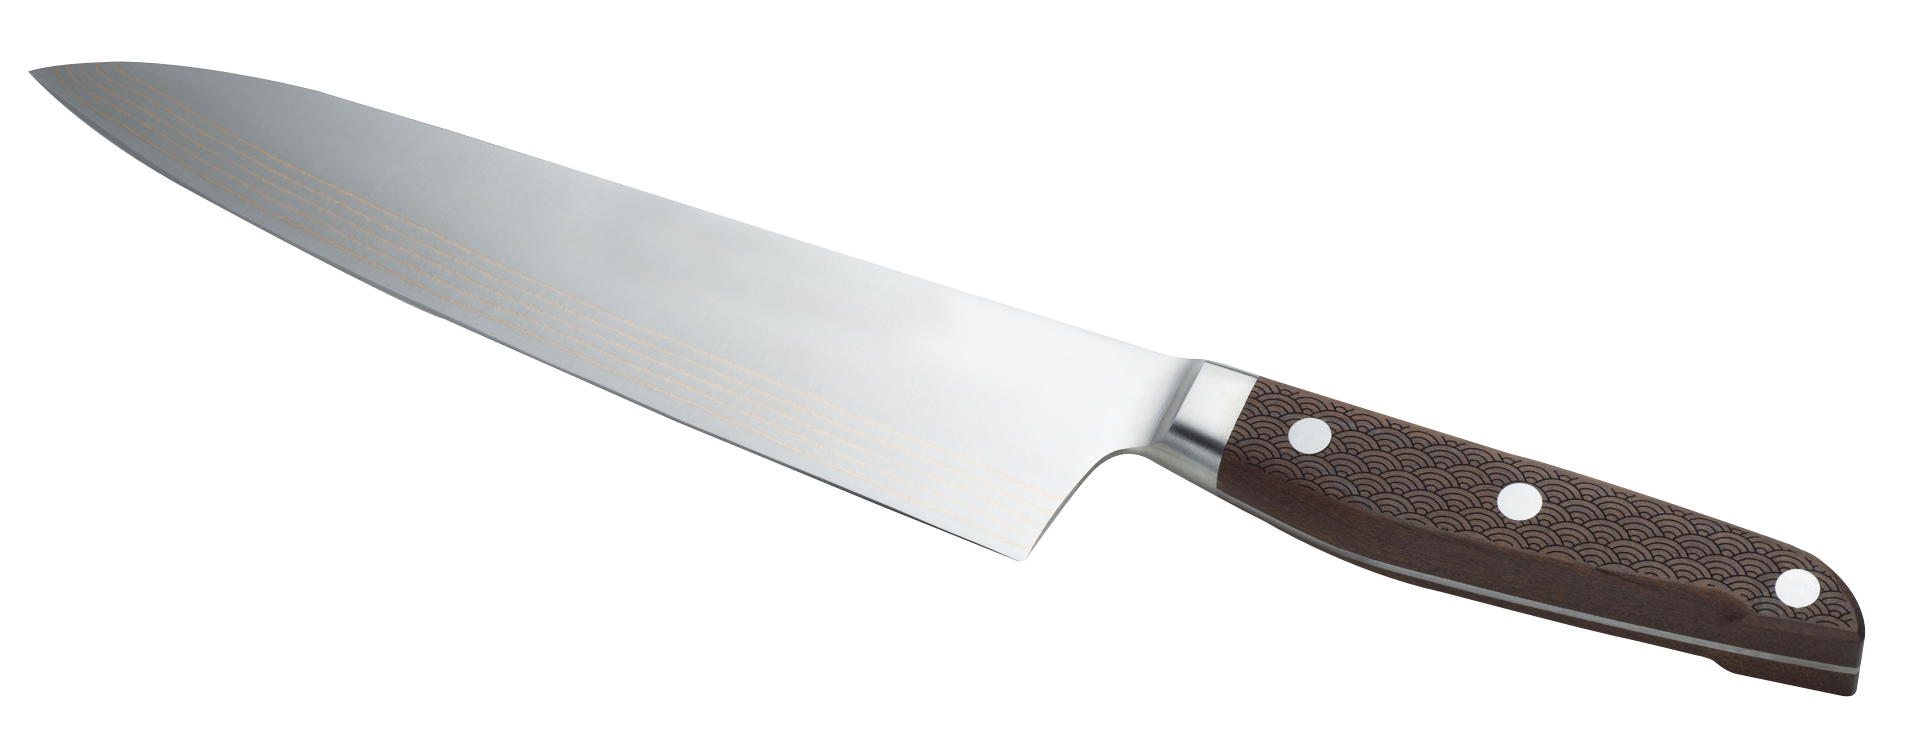 Knife PNG - 27091